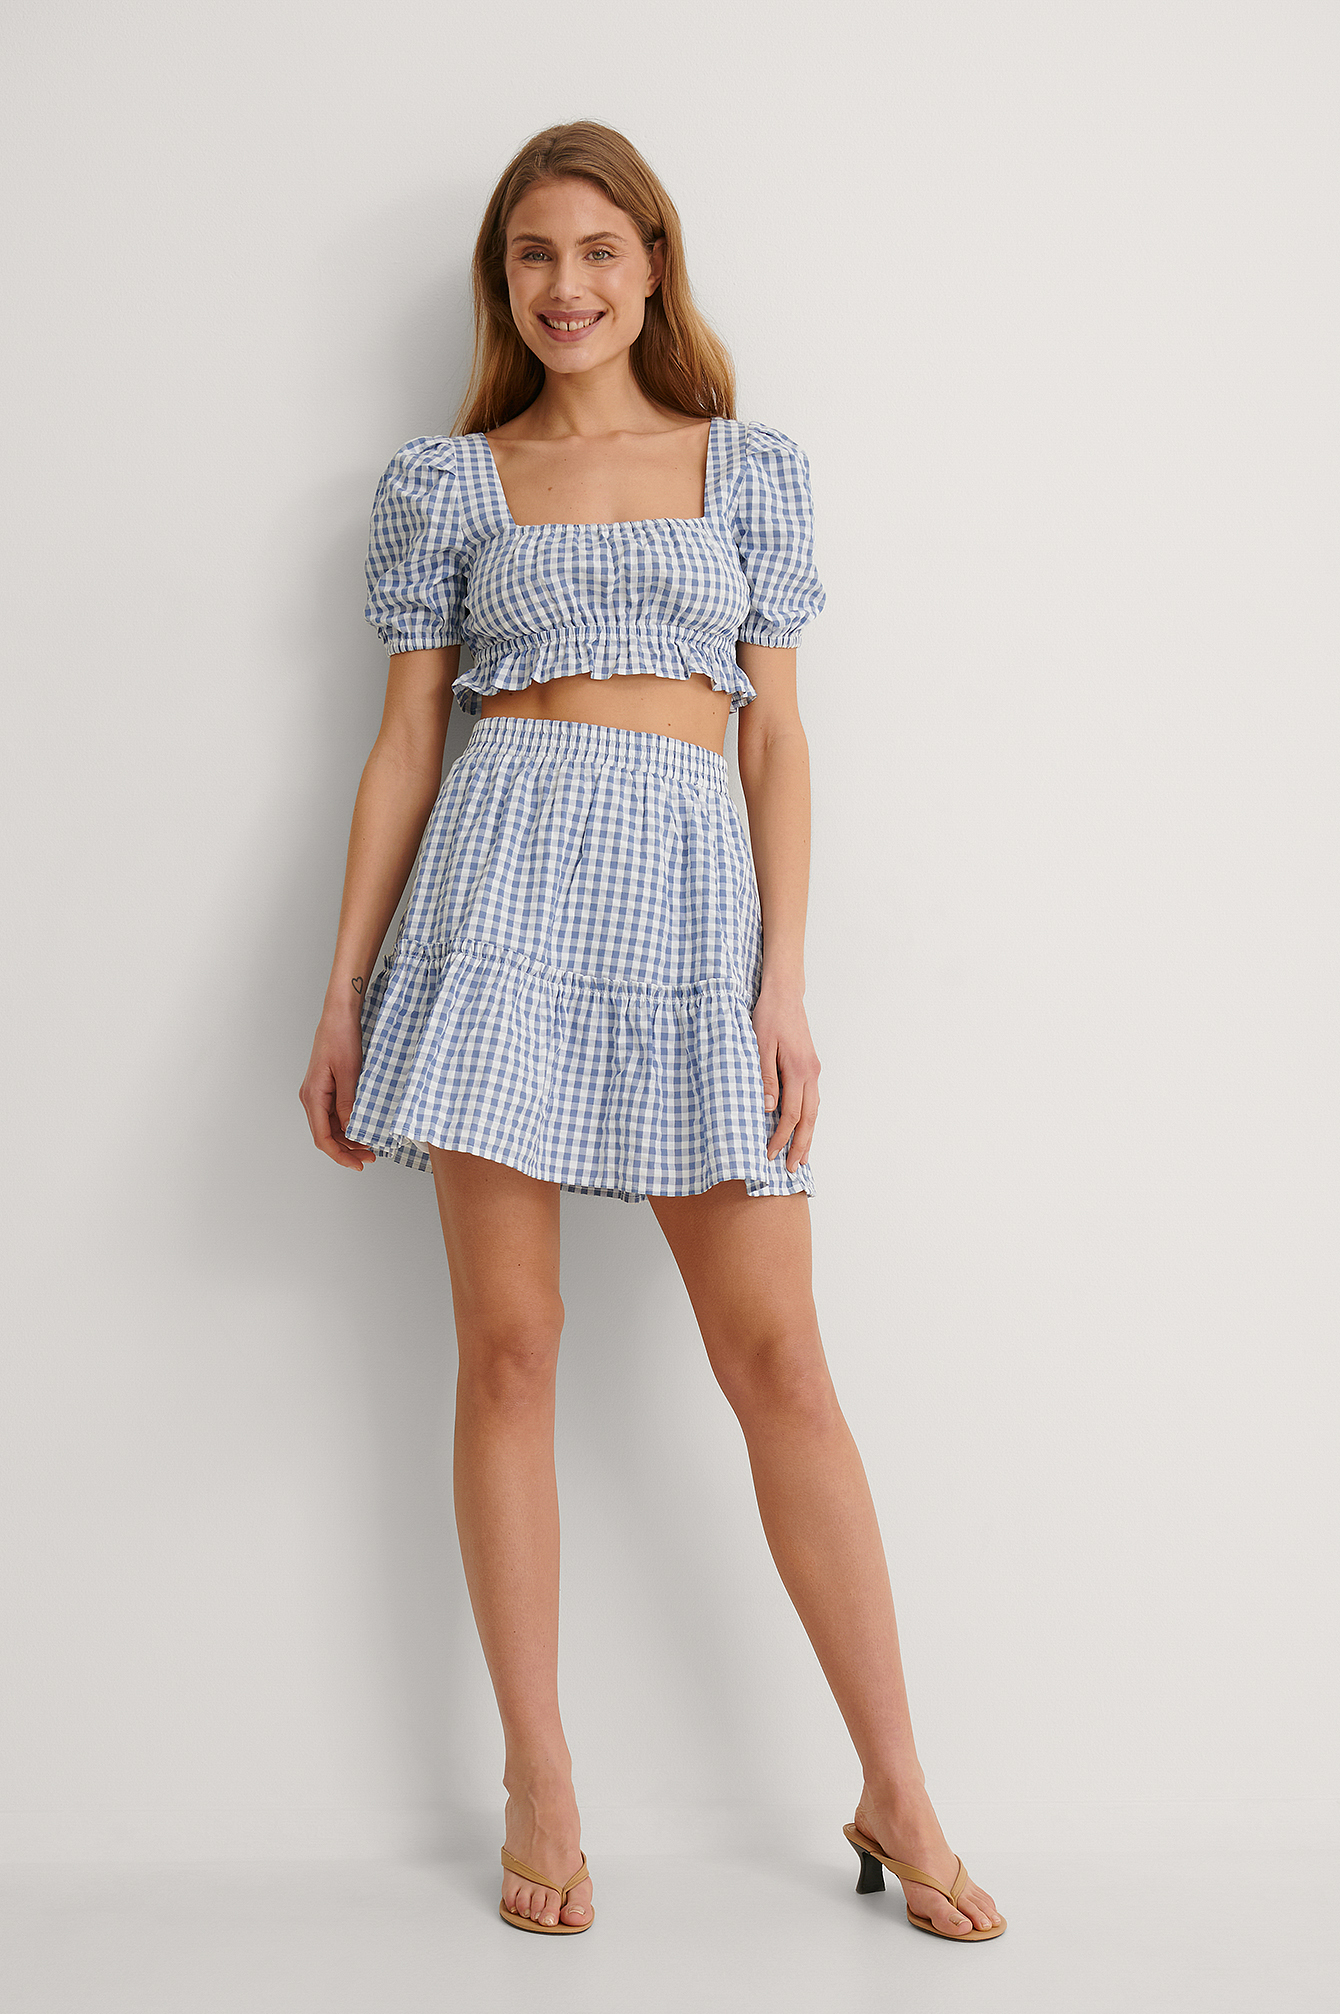 Frilled Gringham Mini Skirt Outfit.